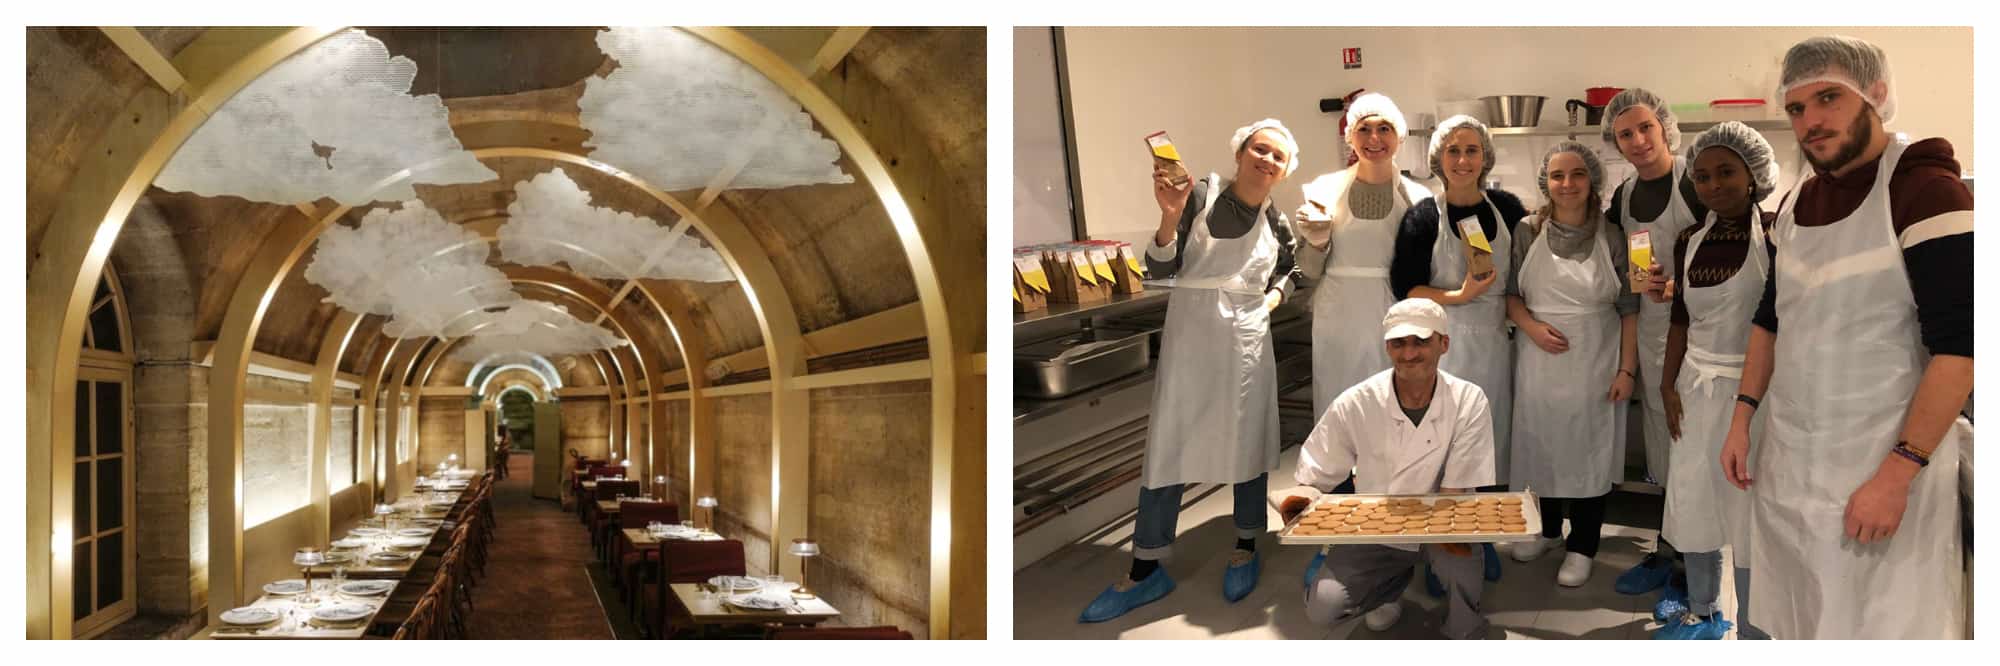 The vaulted interior of a restaurant with floating cloud artworks hanging from the roof (left). A group of people  dressed in chef whites in a kitchen holding a tray of cookies (right).